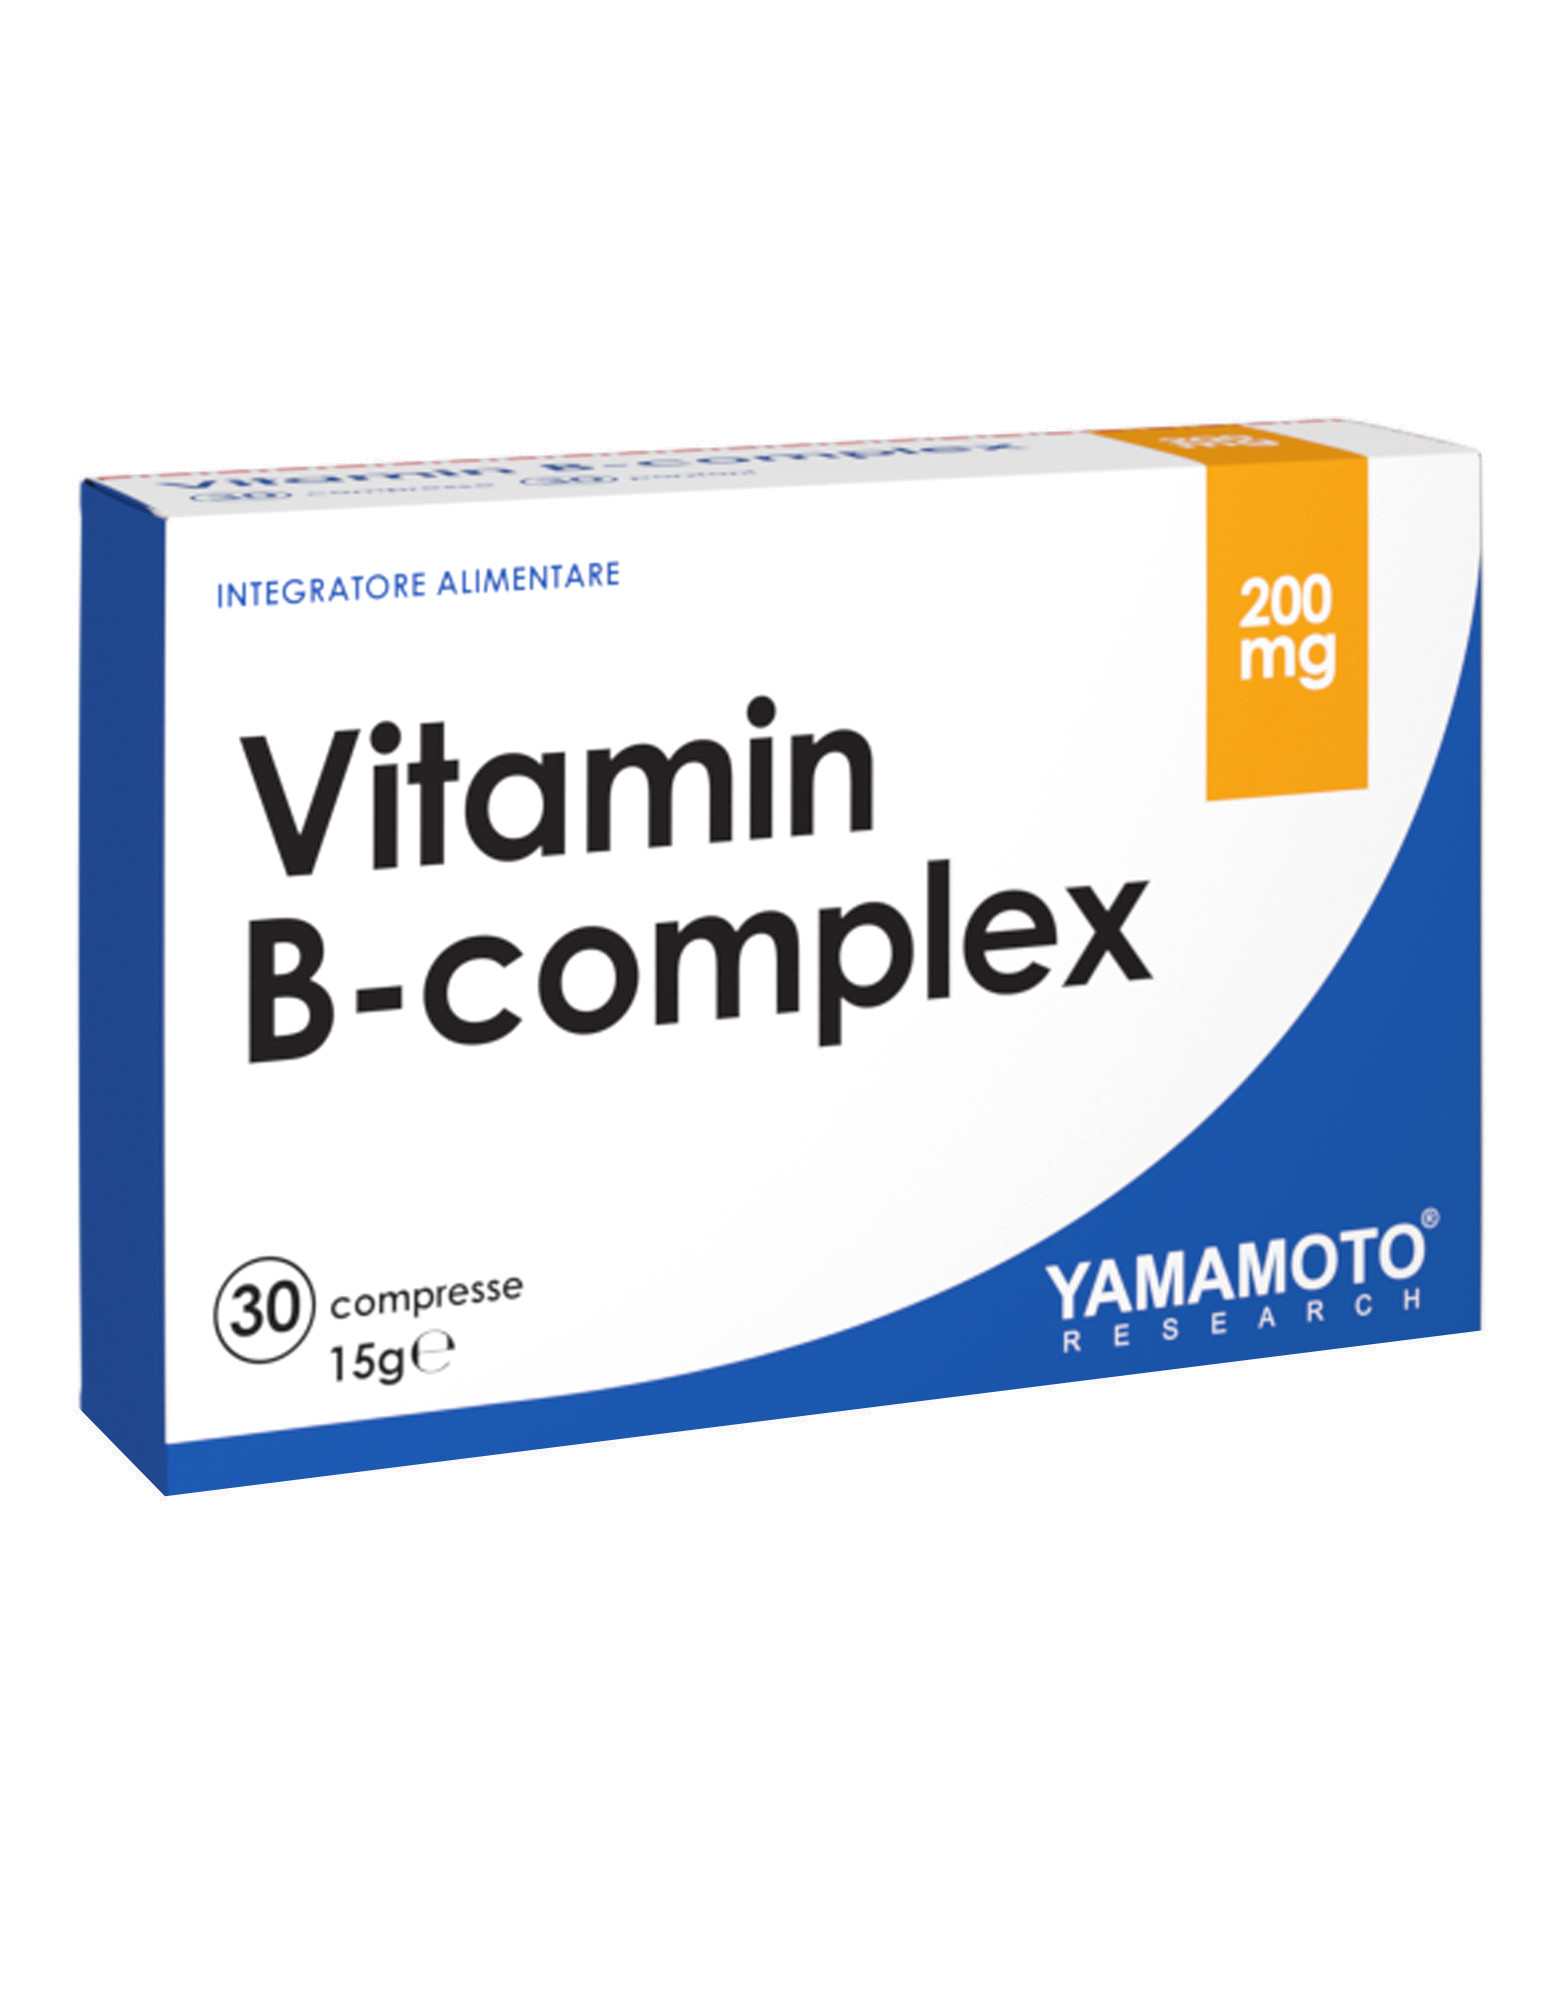 Vitamin B-Complex by Yamamoto research, 30 tablets 